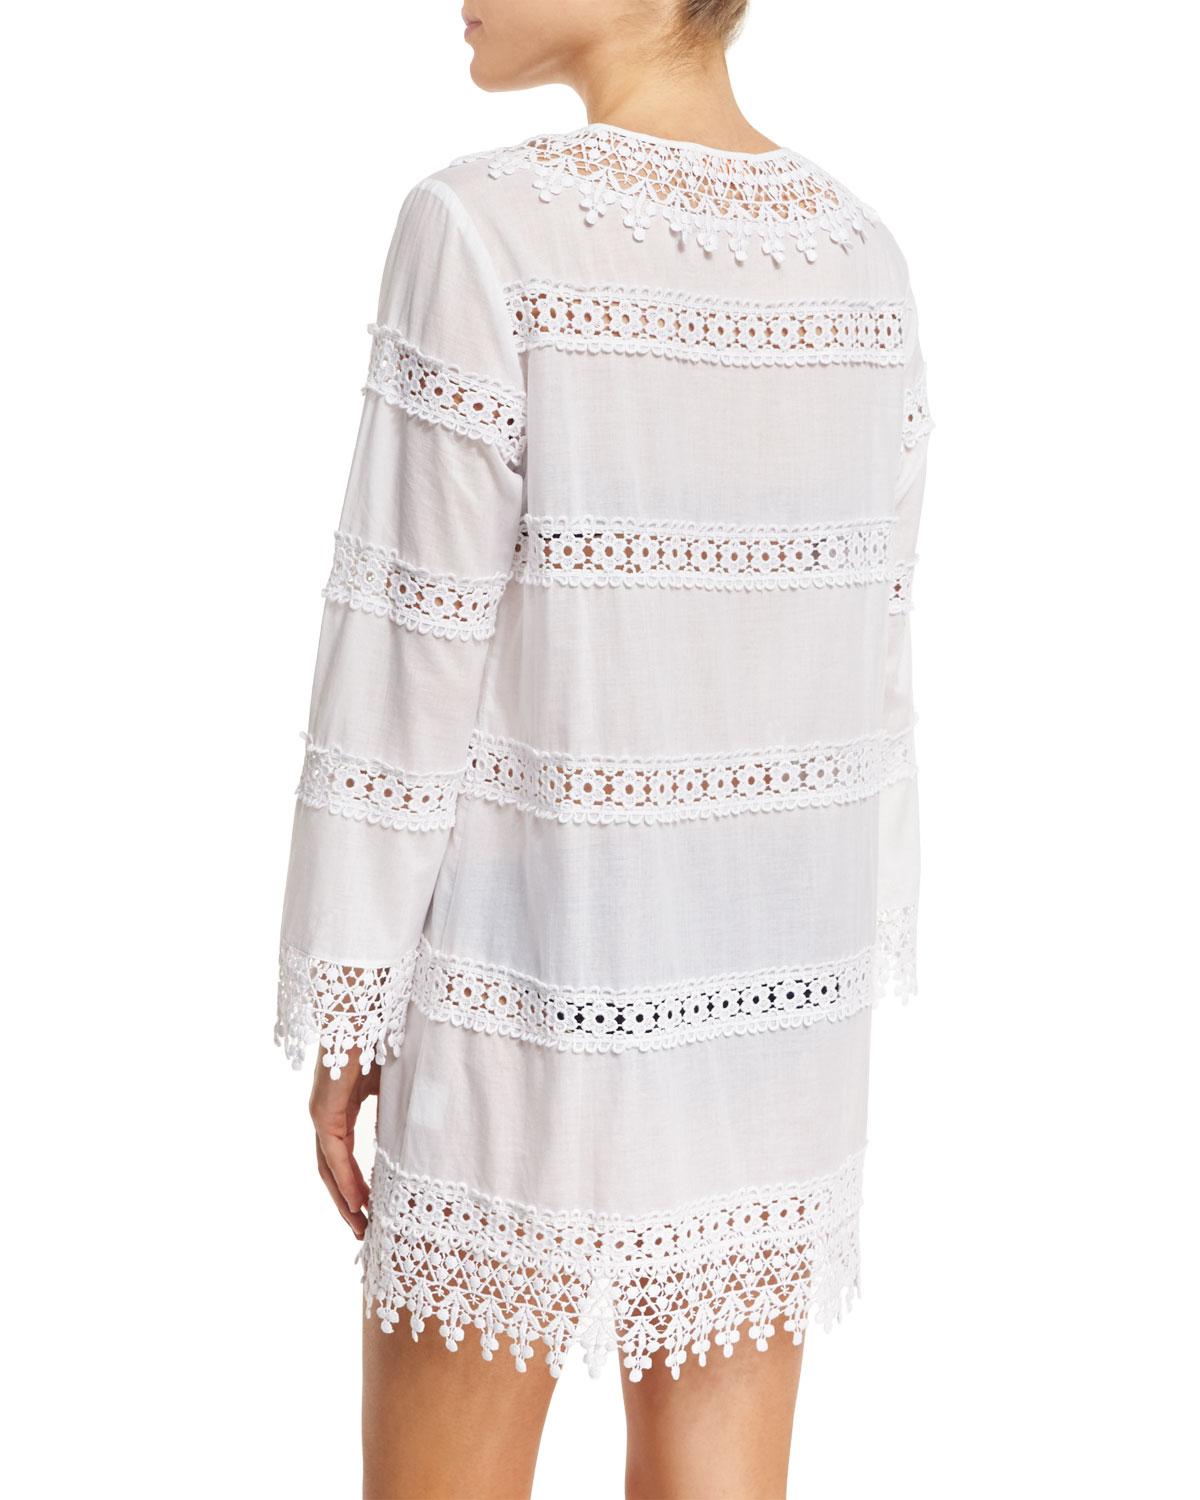 Lyst - Tory Burch Crochet Lace Coverup Dress in White